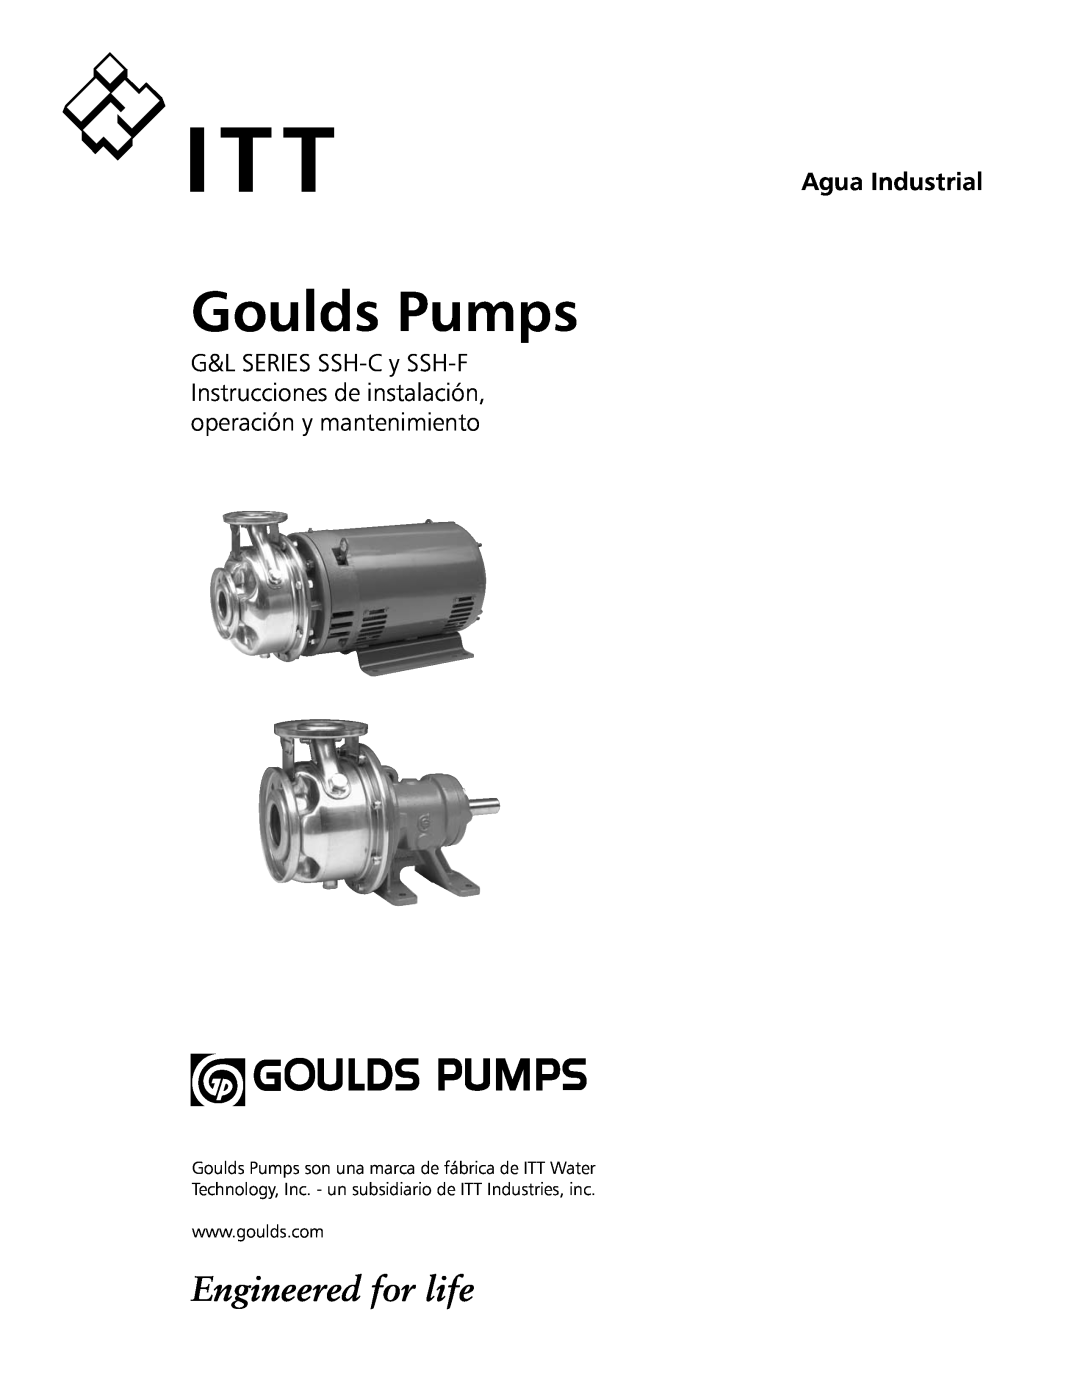 ITT SSH-F, SSH-C manual Agua Industrial, Goulds Pumps, Engineered for life 